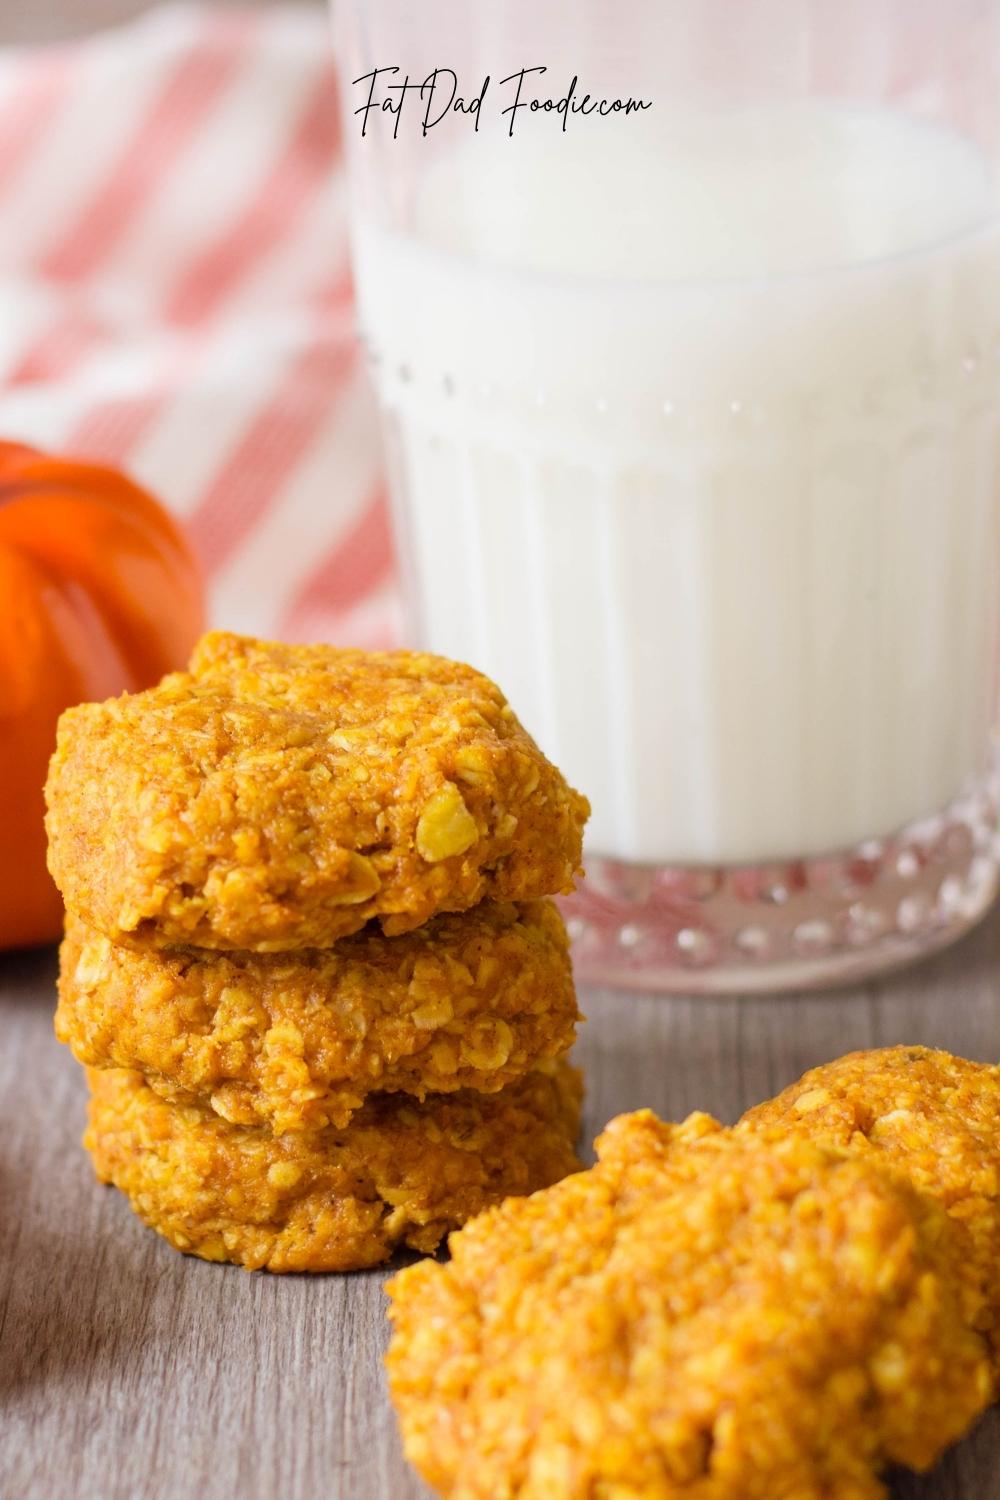 stacked no bake pumpkin oatmeal cookies with glass of milk